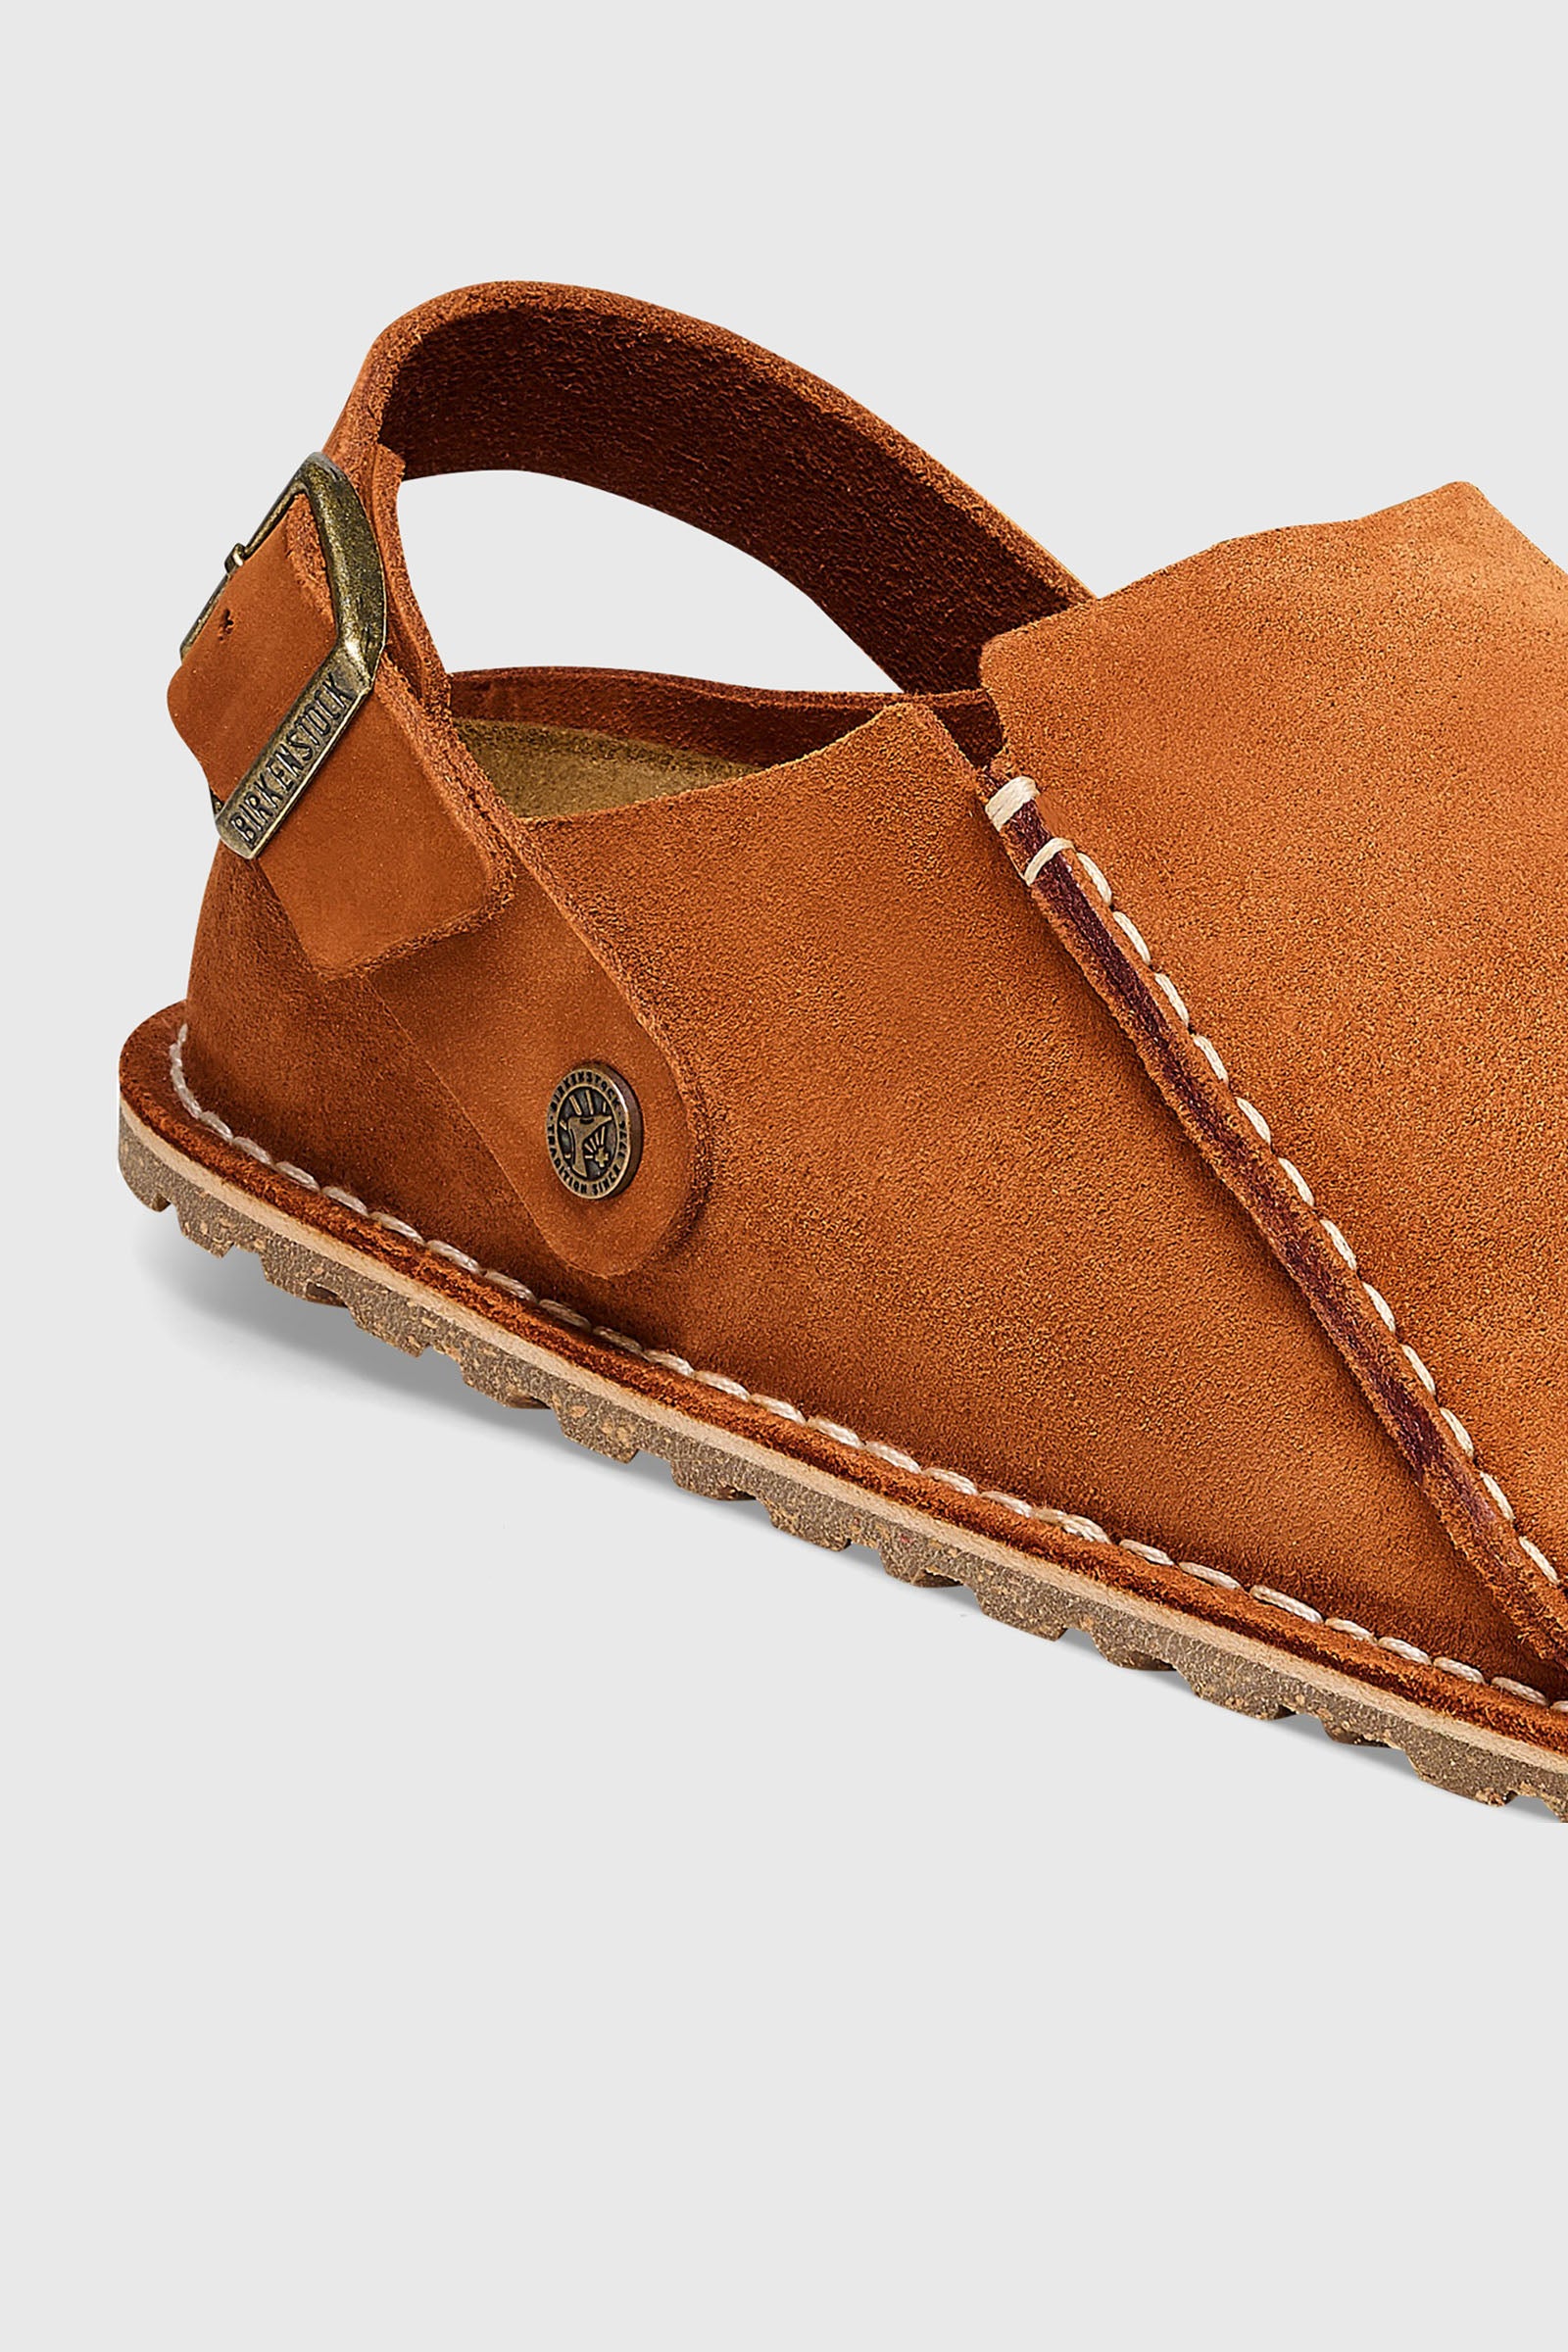 "Lutry Premium, Mink Suede Tobacco, in Brown Leather for Women" - 2